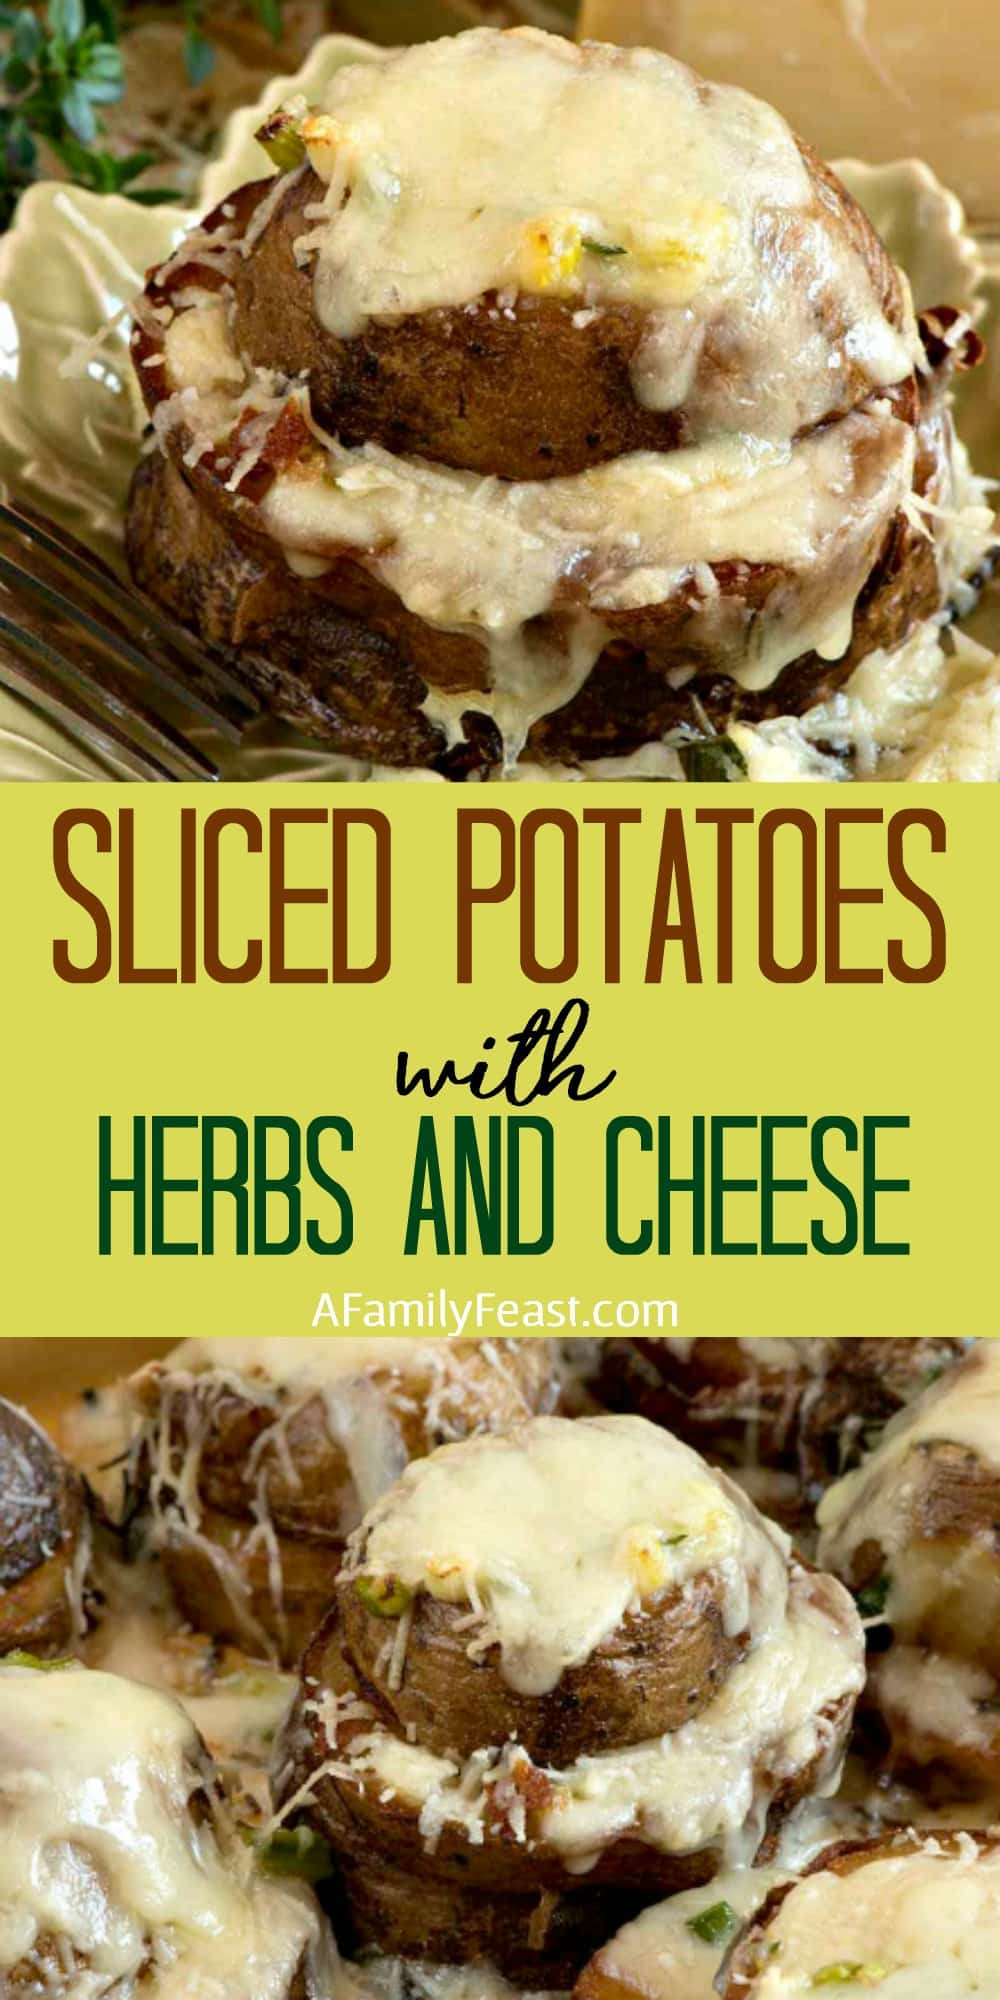 Sliced Potatoes with Herbs and Cheese